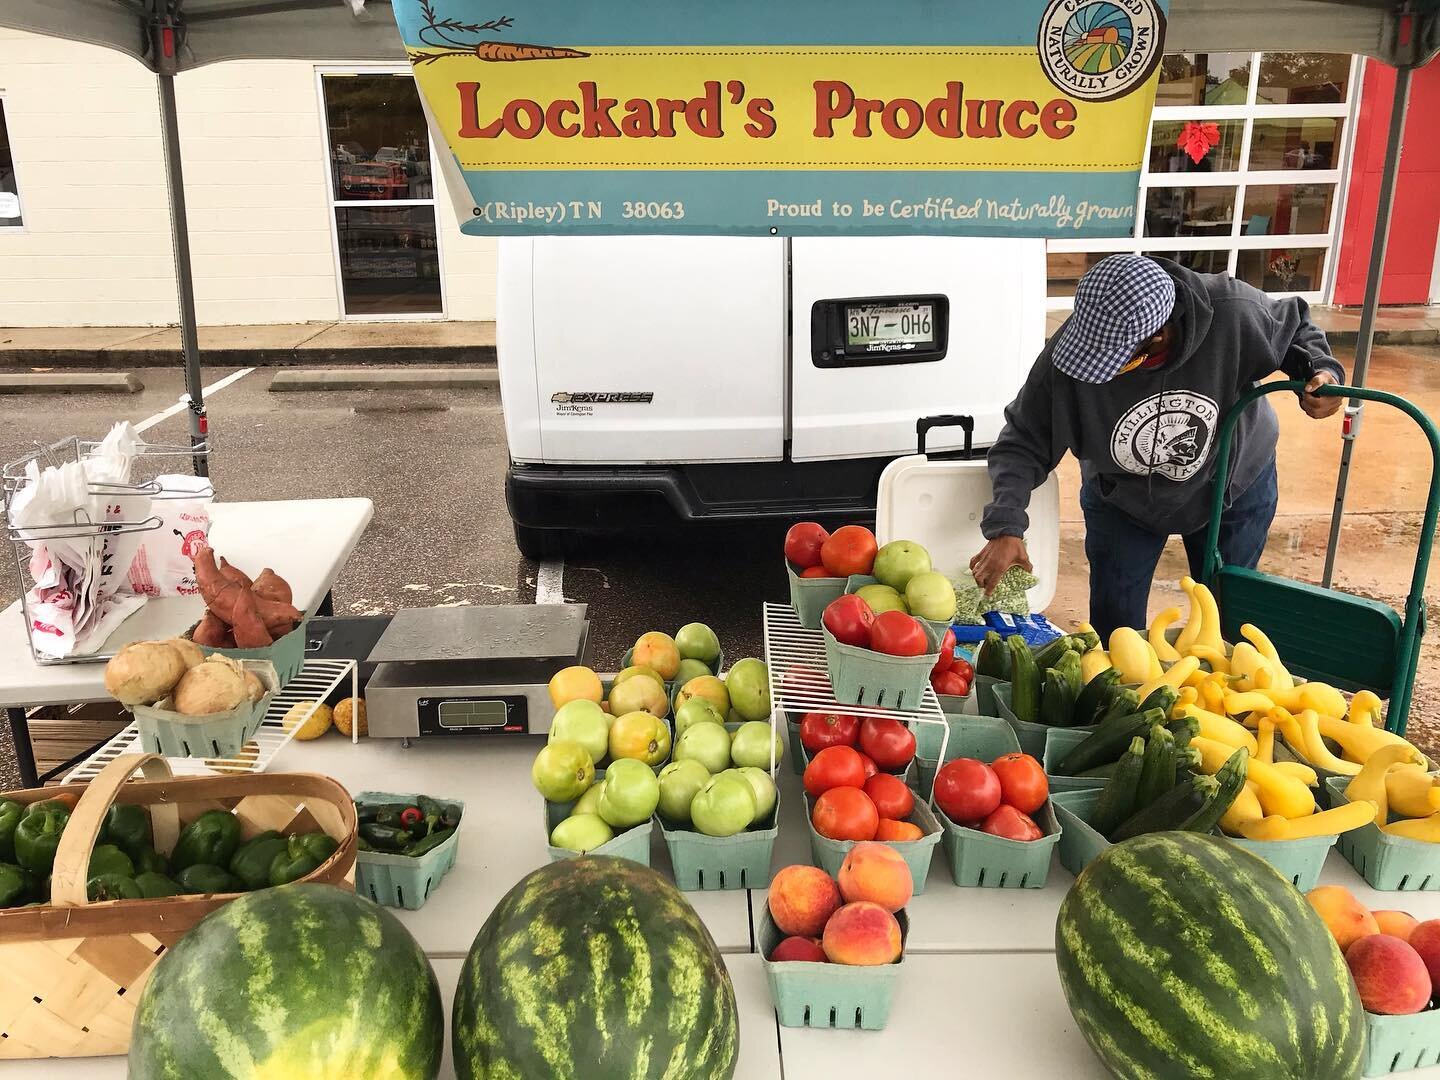 Mrs. Lockard&rsquo;s Produce is always worth the trip, even when it&rsquo;s rainy! Come on out and support our produce vendors at our final market of the season today! Open until 1pm🍅🍉🌶🥒🍑😊